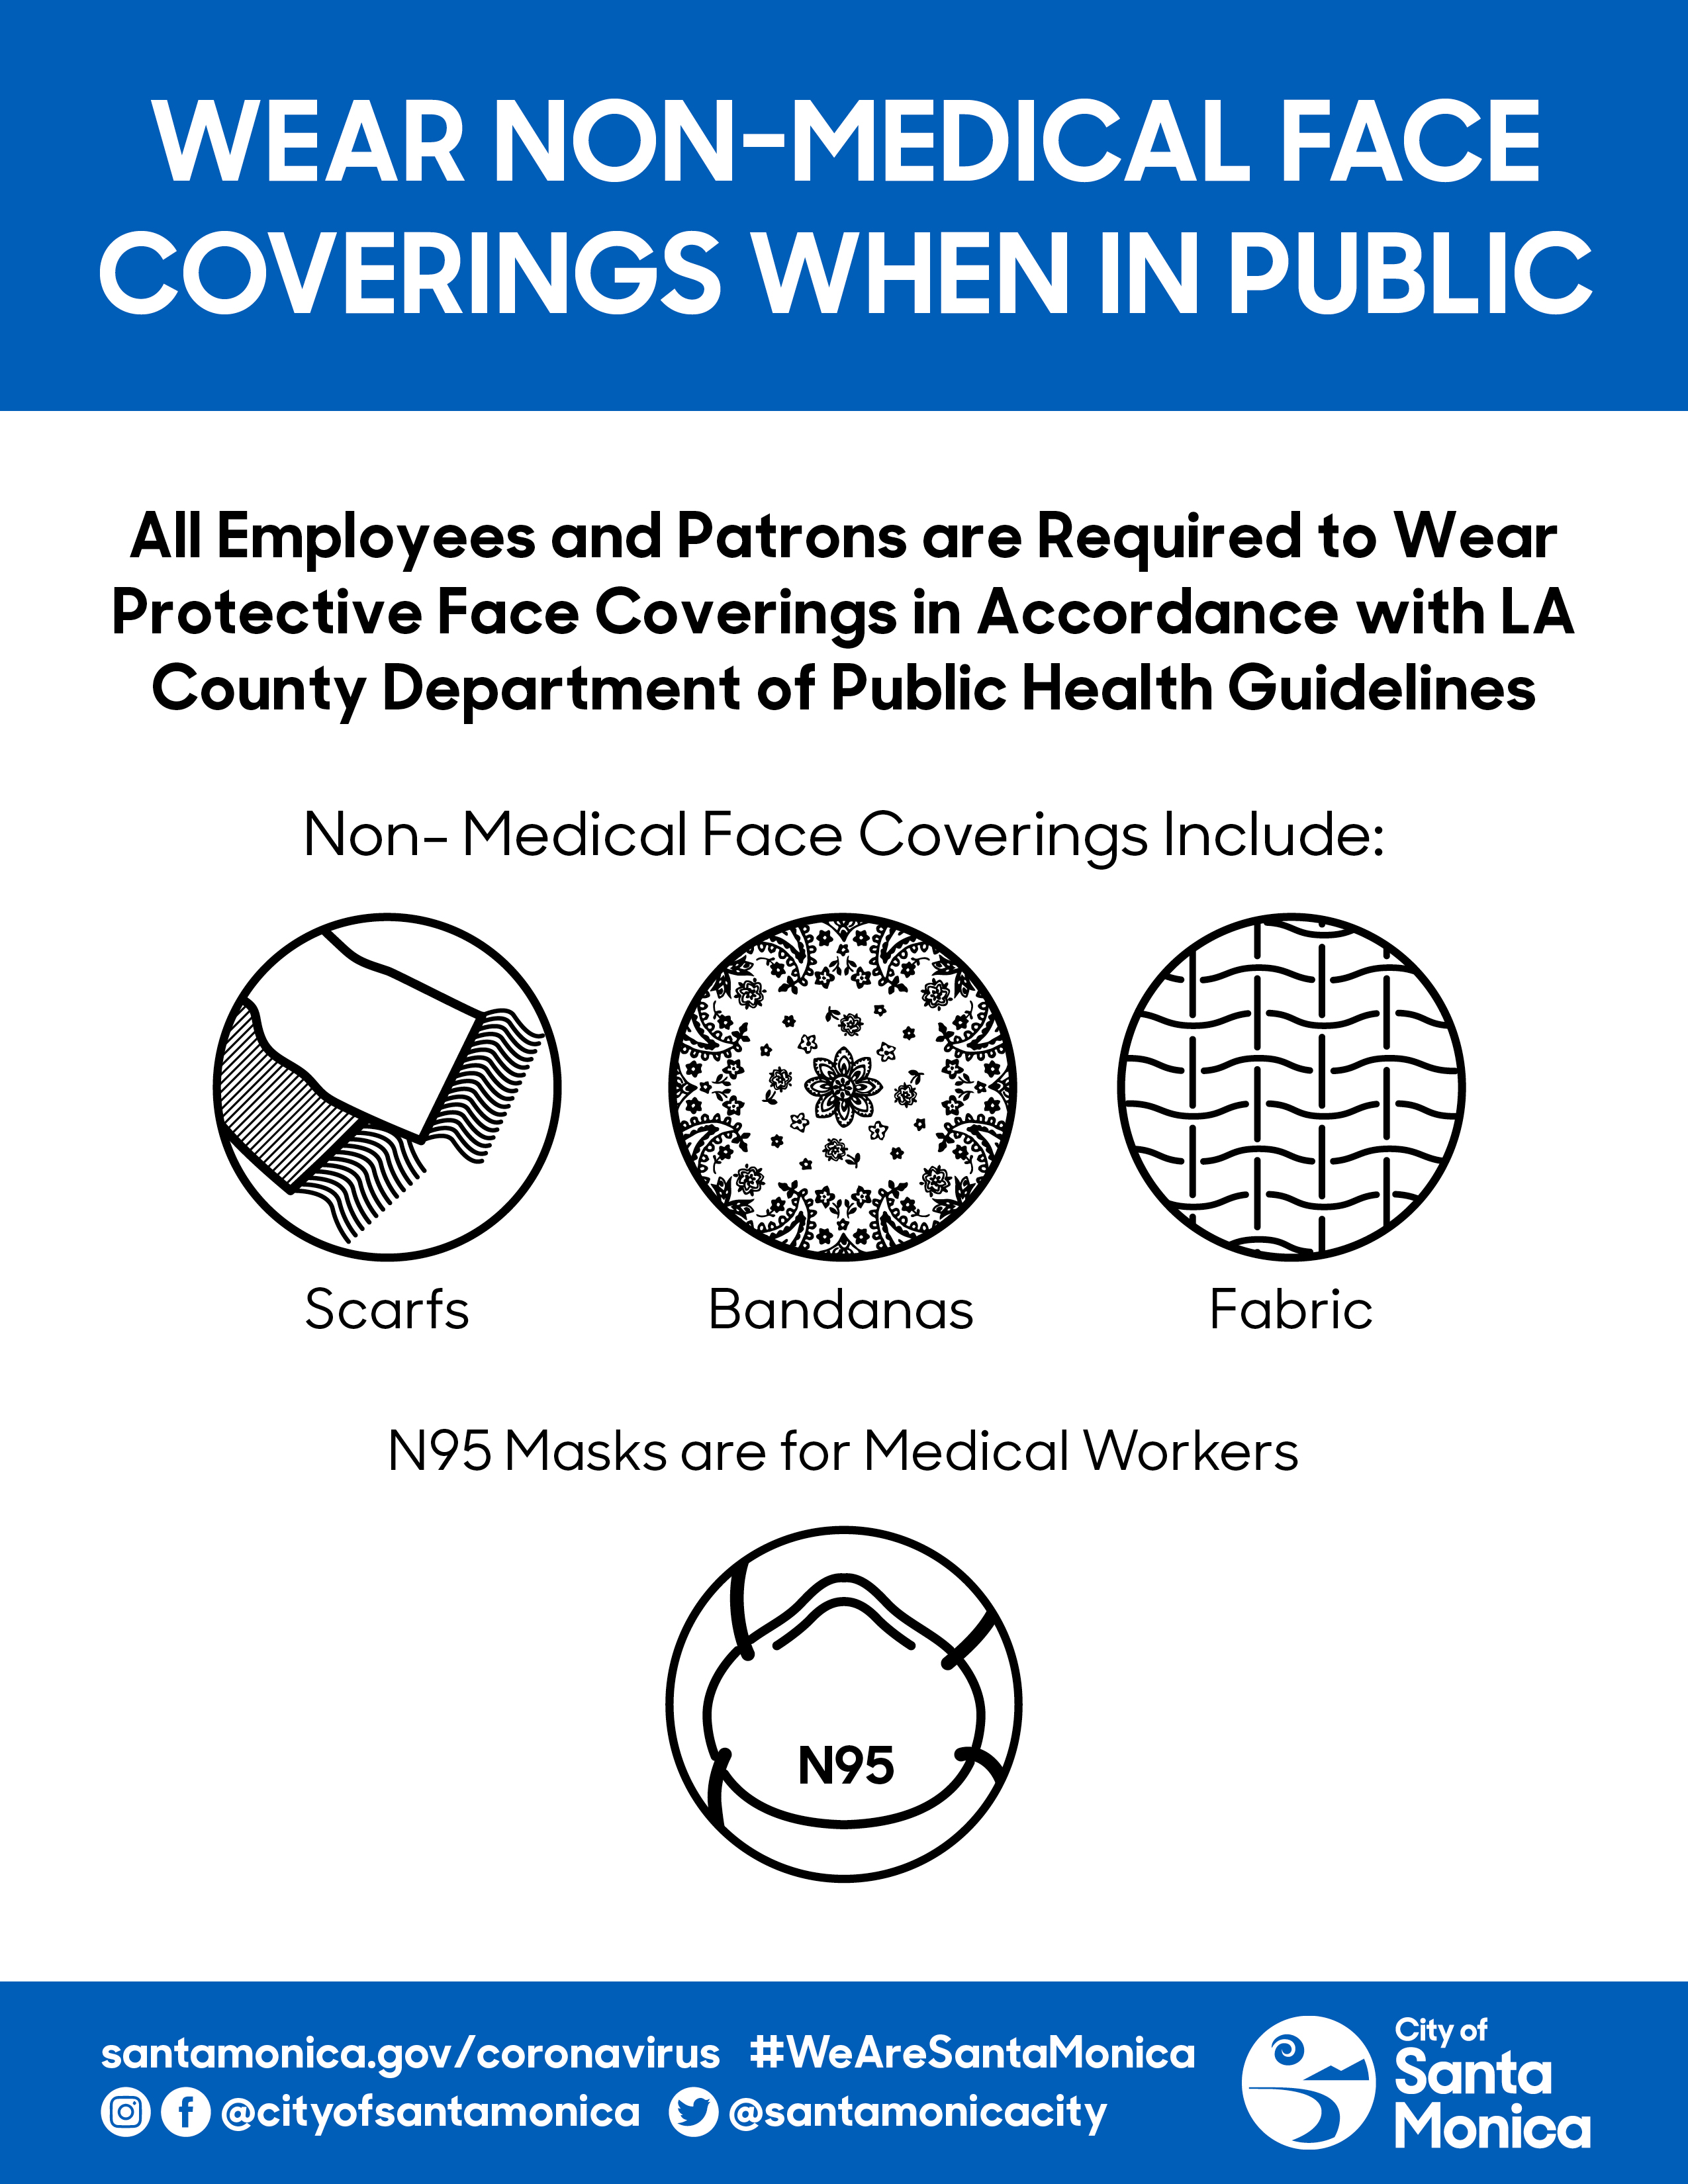 Wear non-medical face coverings when in public